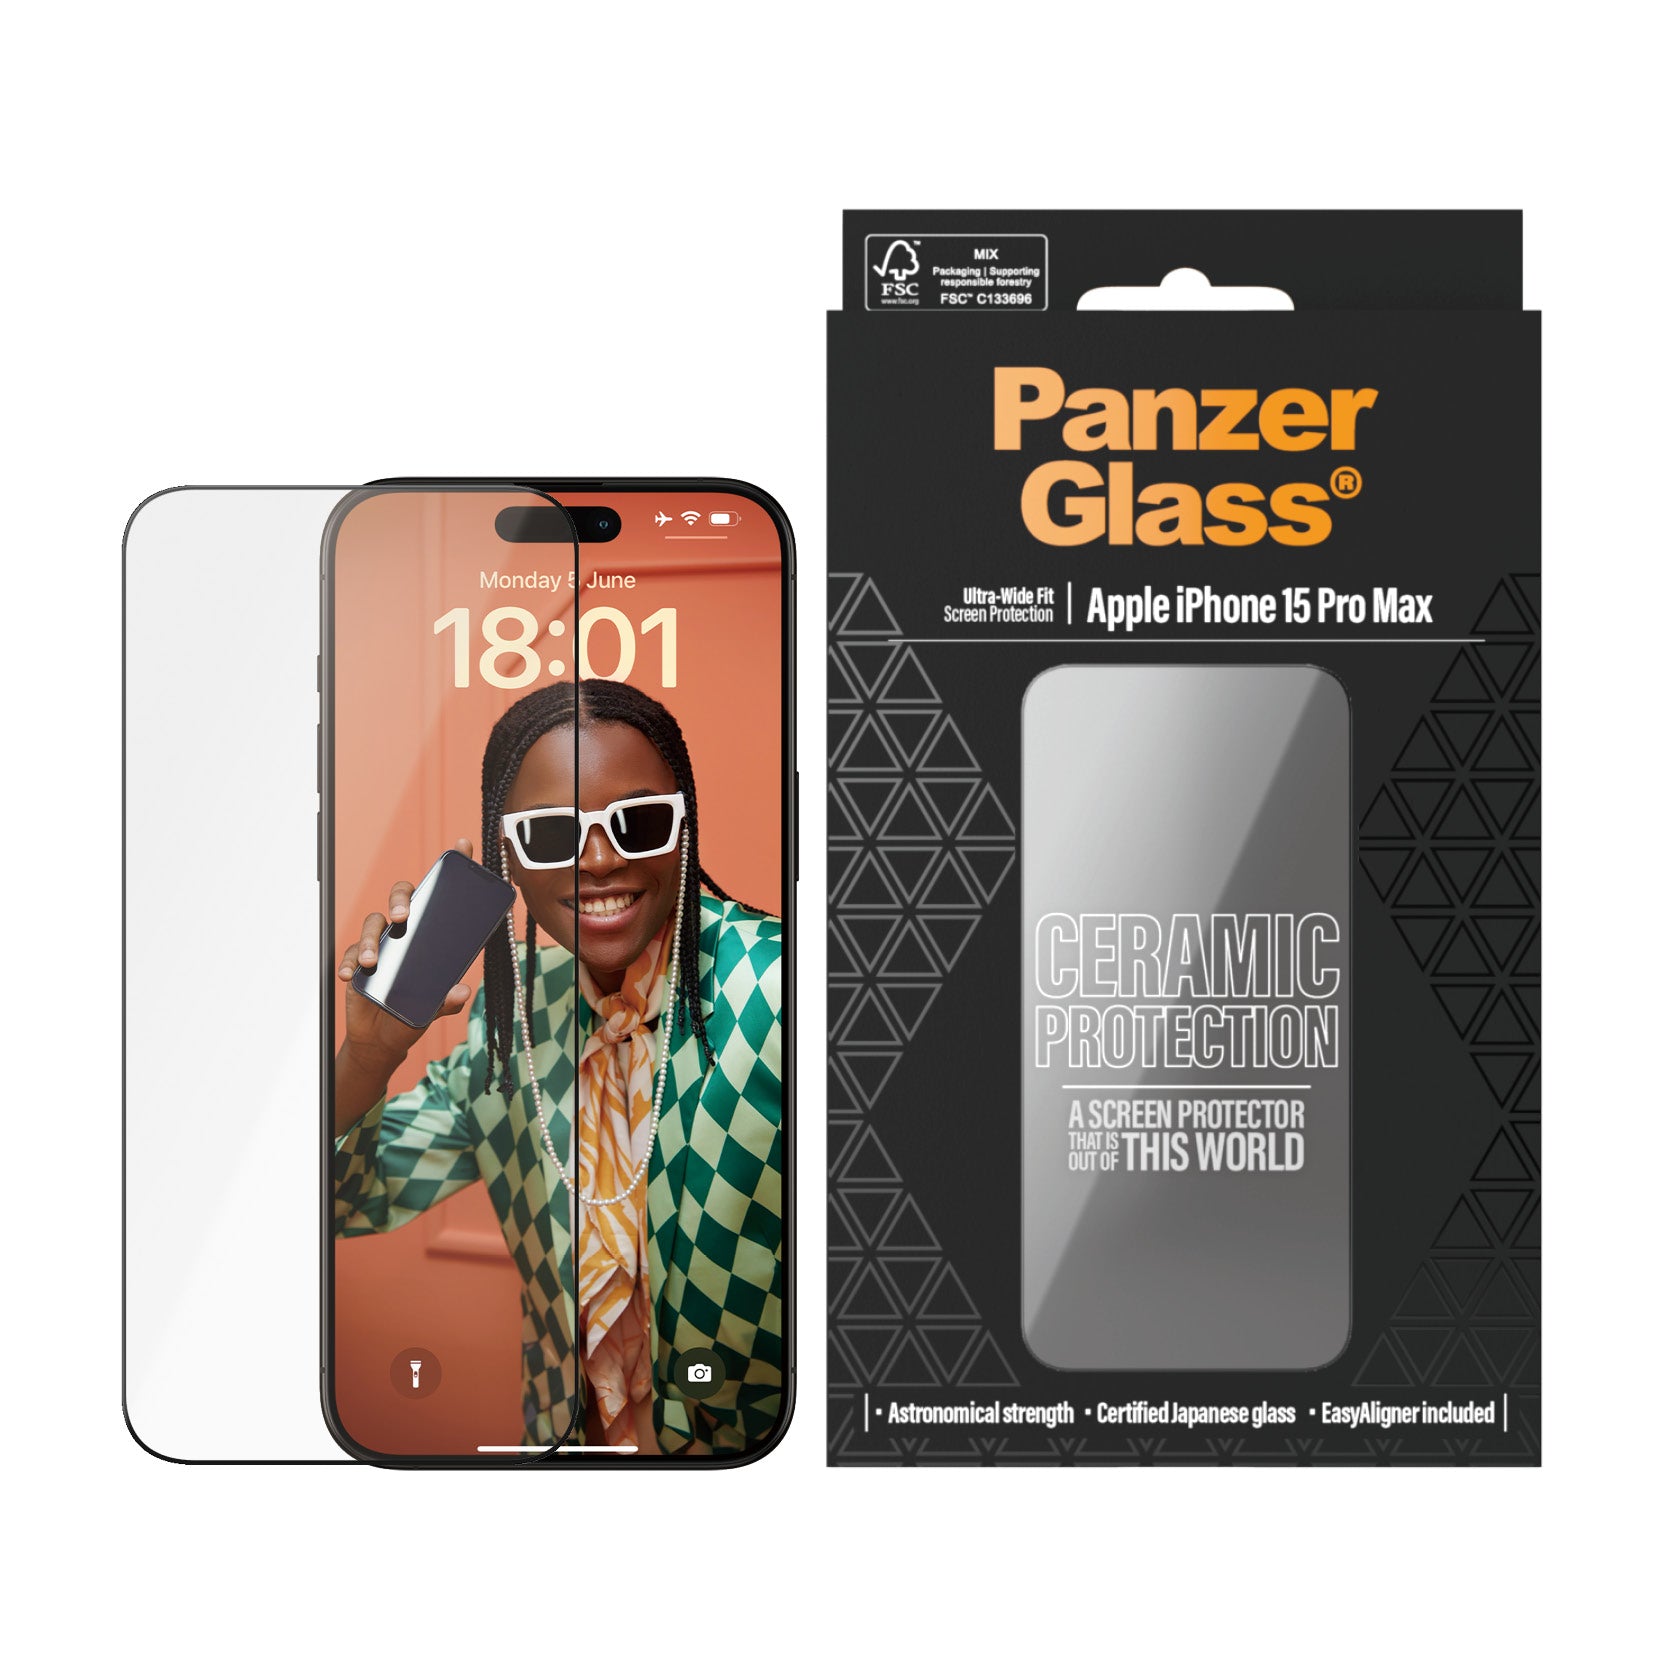 PanzerGlass Ceramic Protection for iPhone 15 Pro Max | Ultra-Wide Fit